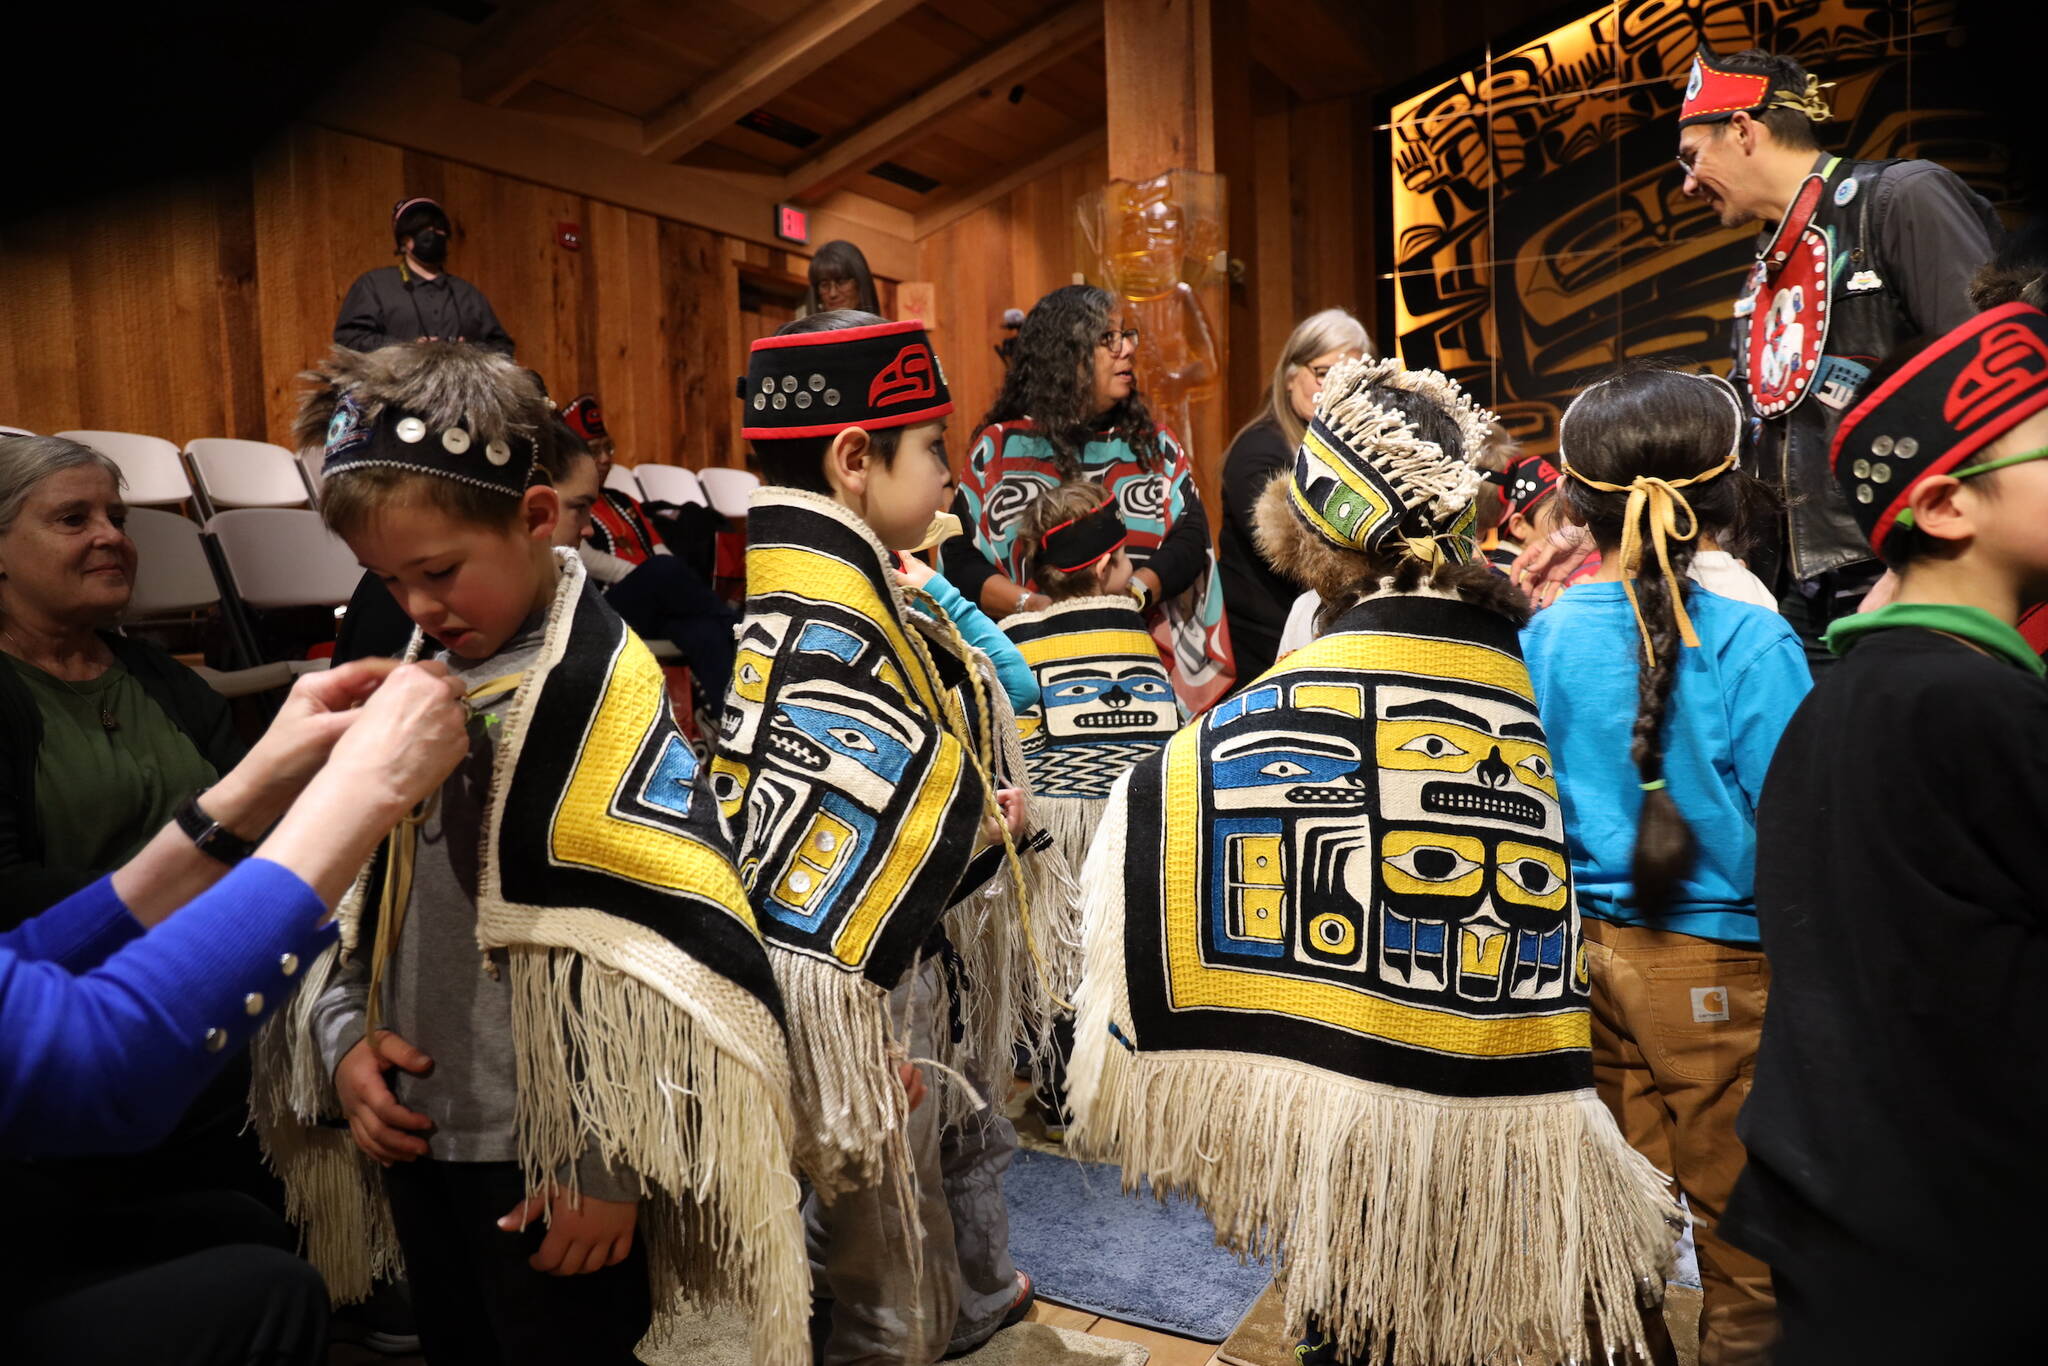 Clarise Larson / Juneau Empire 
Young students from the Tlingit Culture Language and Literacy program at Harborview Elementary School get help putting on Chilkat robes that were were weaved by student weavers who participated in a more than two-year-long apprenticeship to learn the craft.